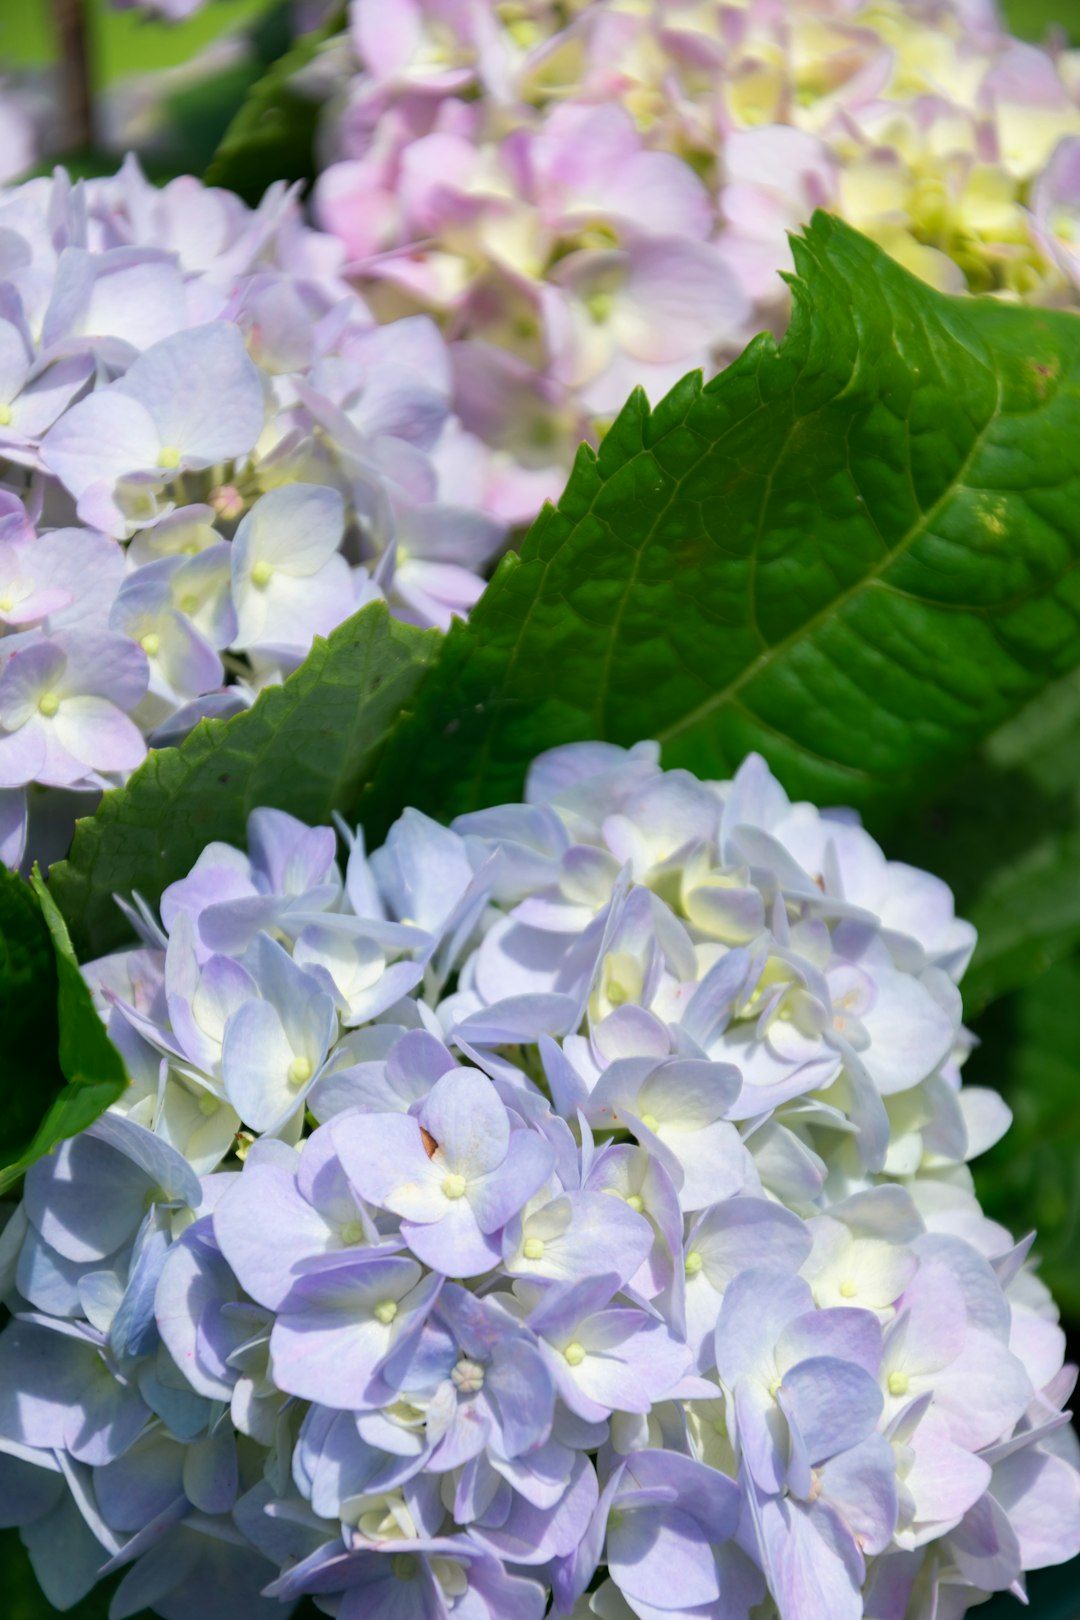 white and purple flowers with green leaves